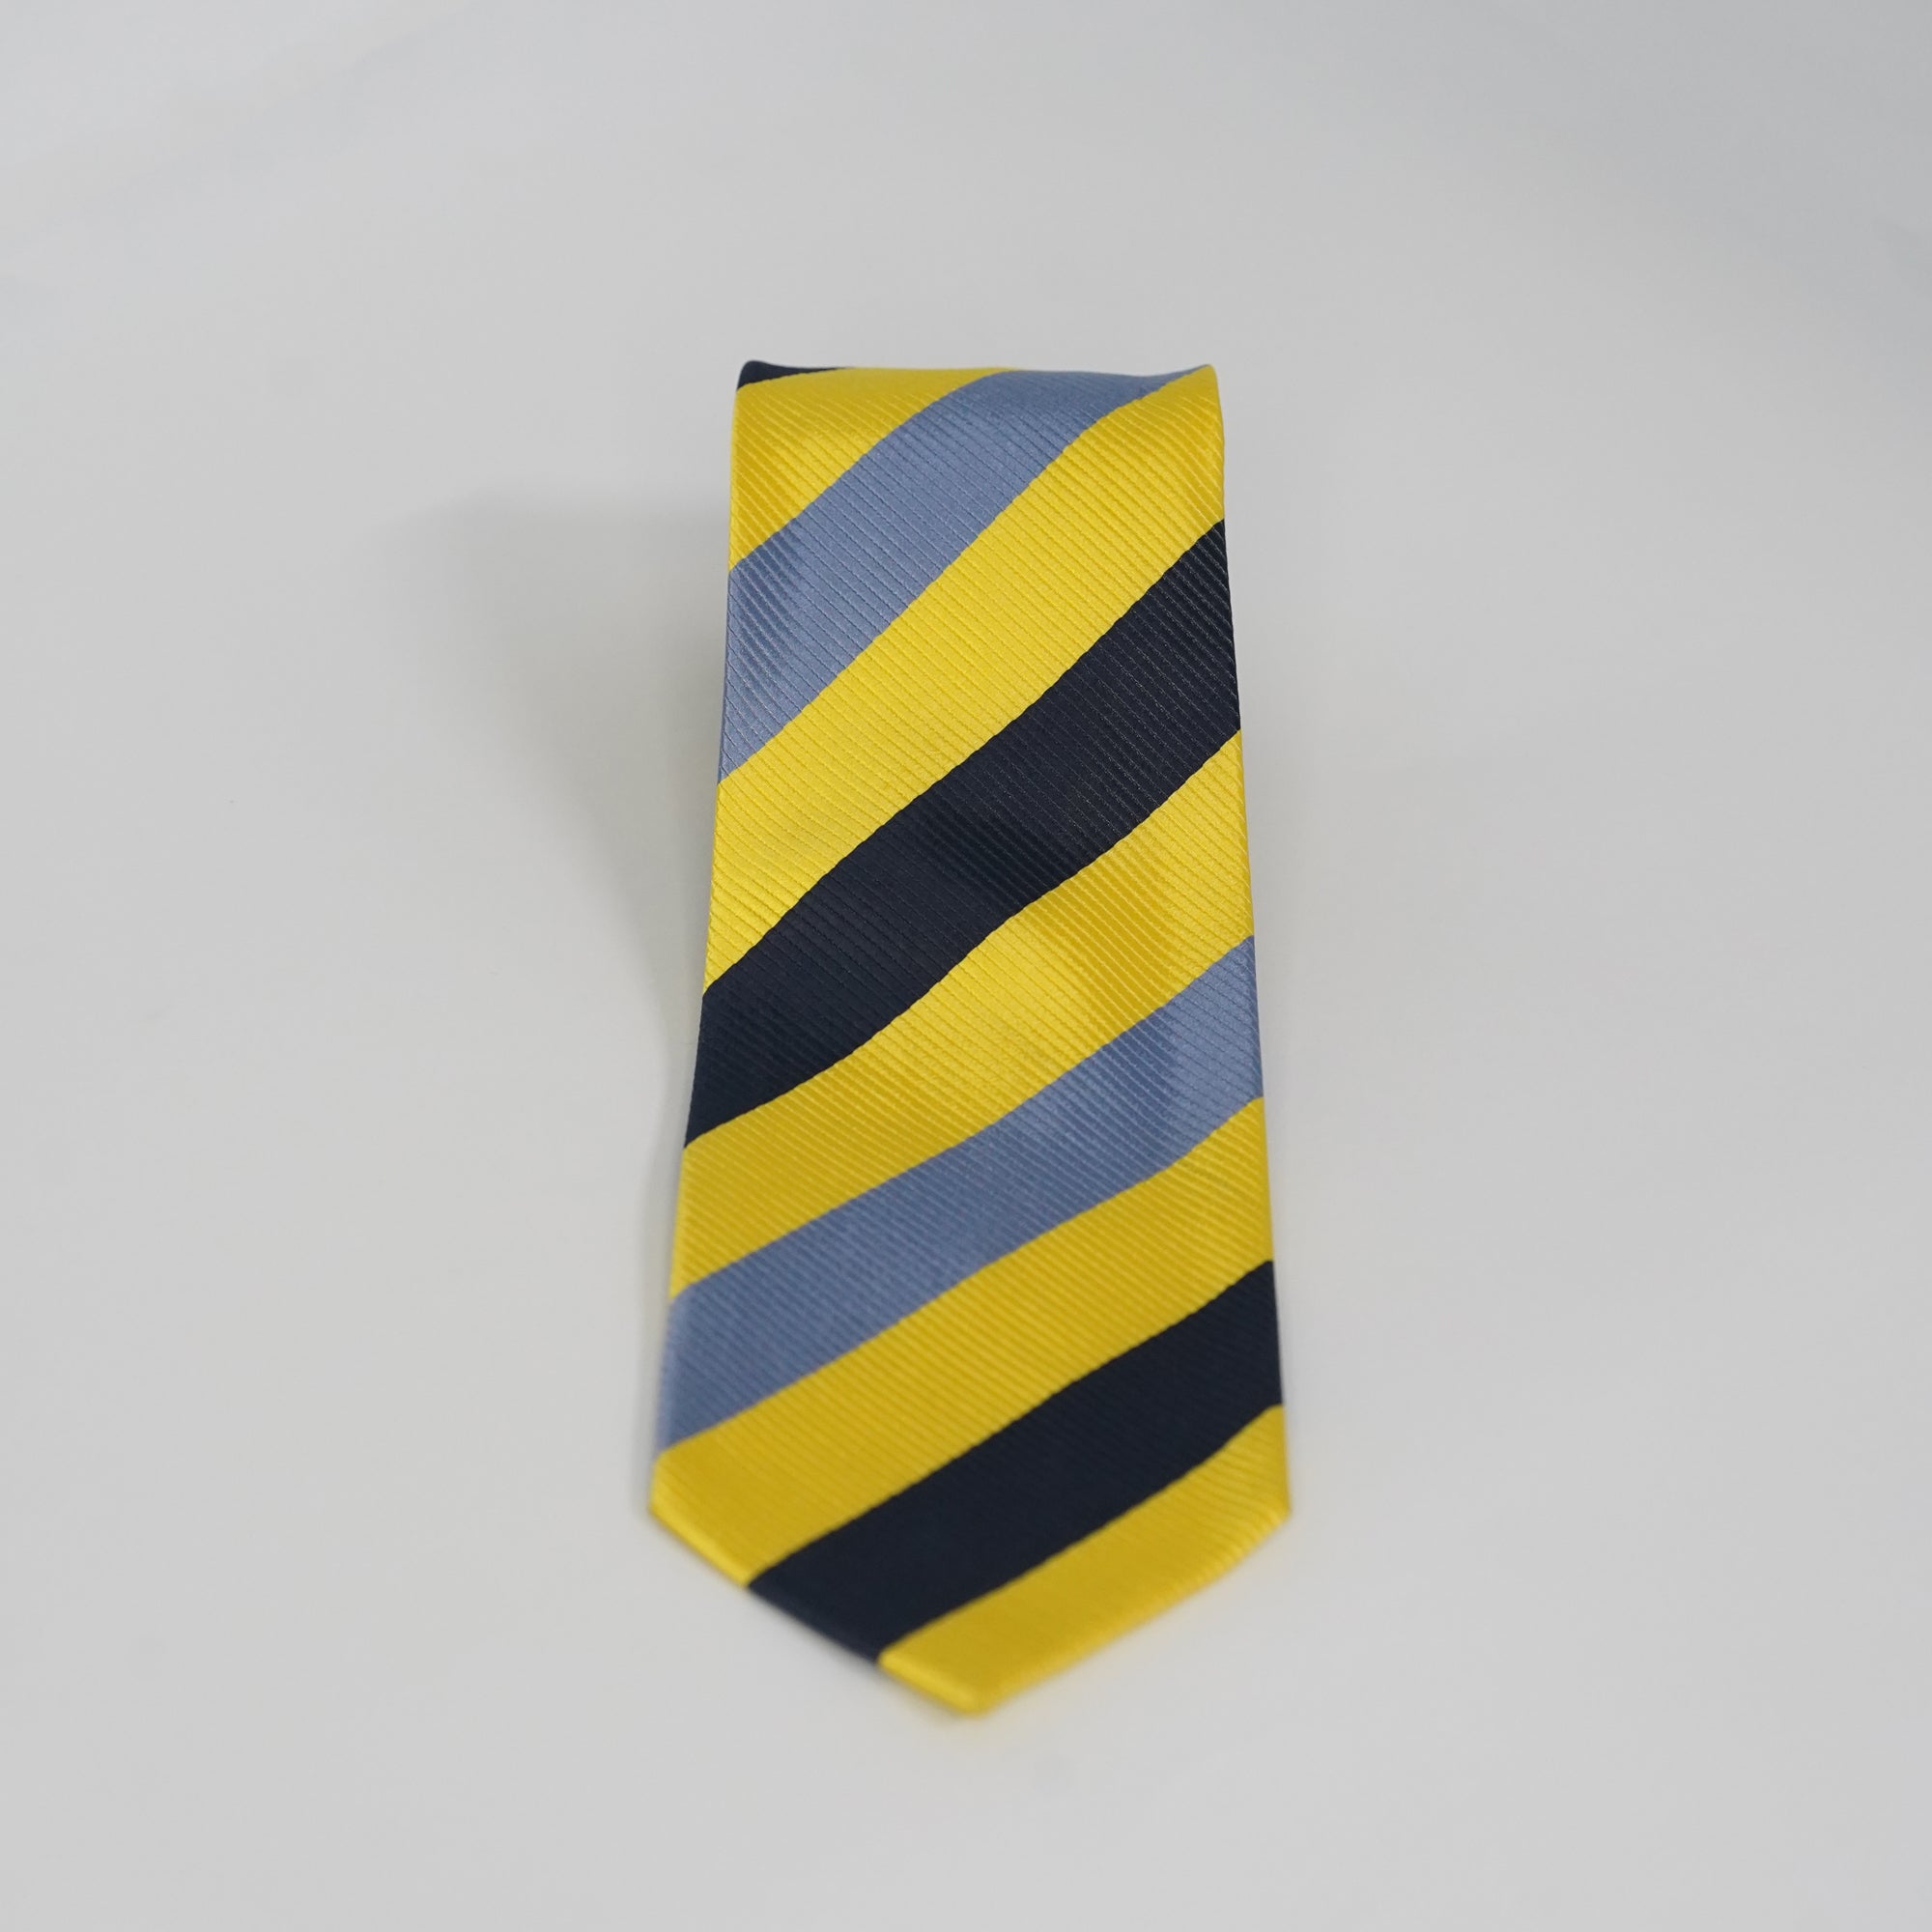 THE YELLOW STRIPED TIE